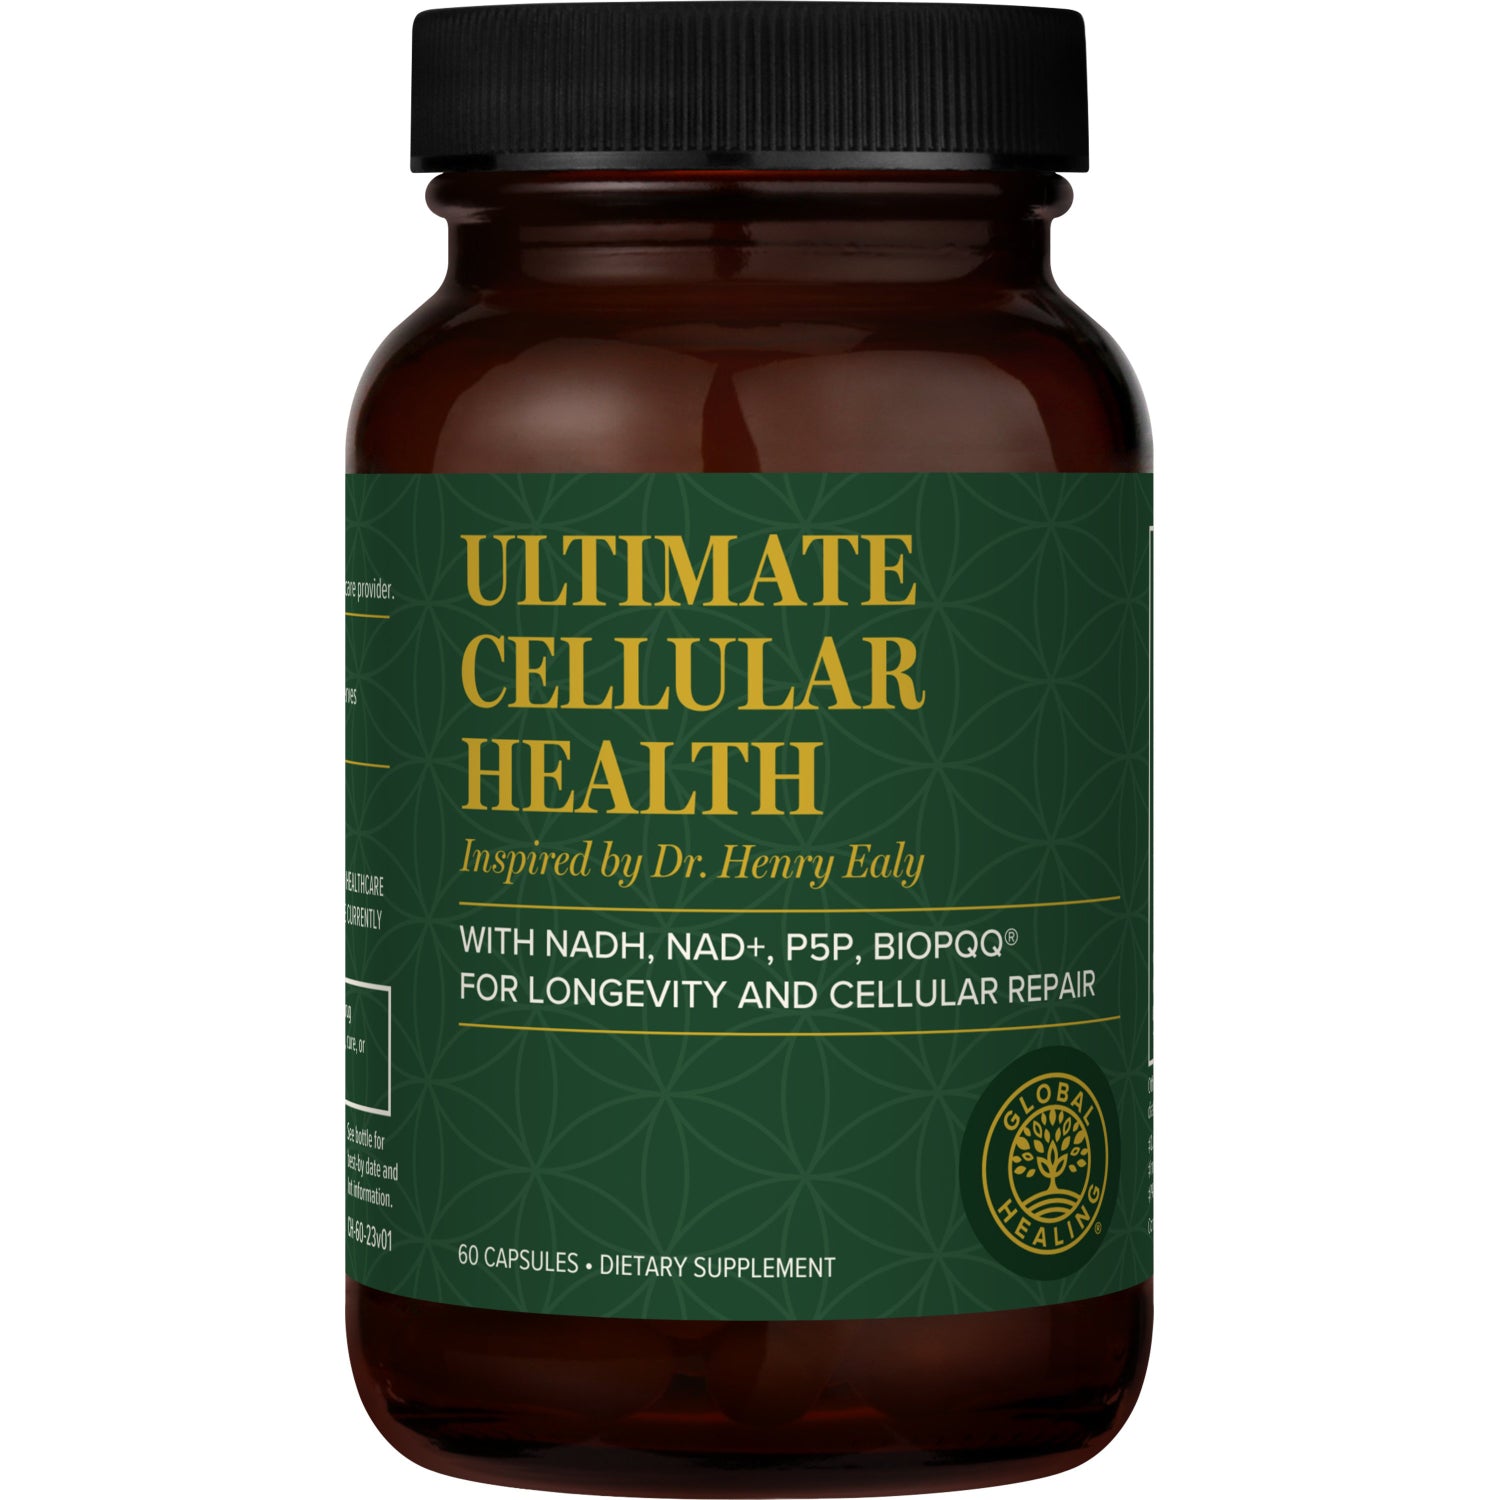 Ultimate Cellular Health by Global Healing Bottle 60 capsules